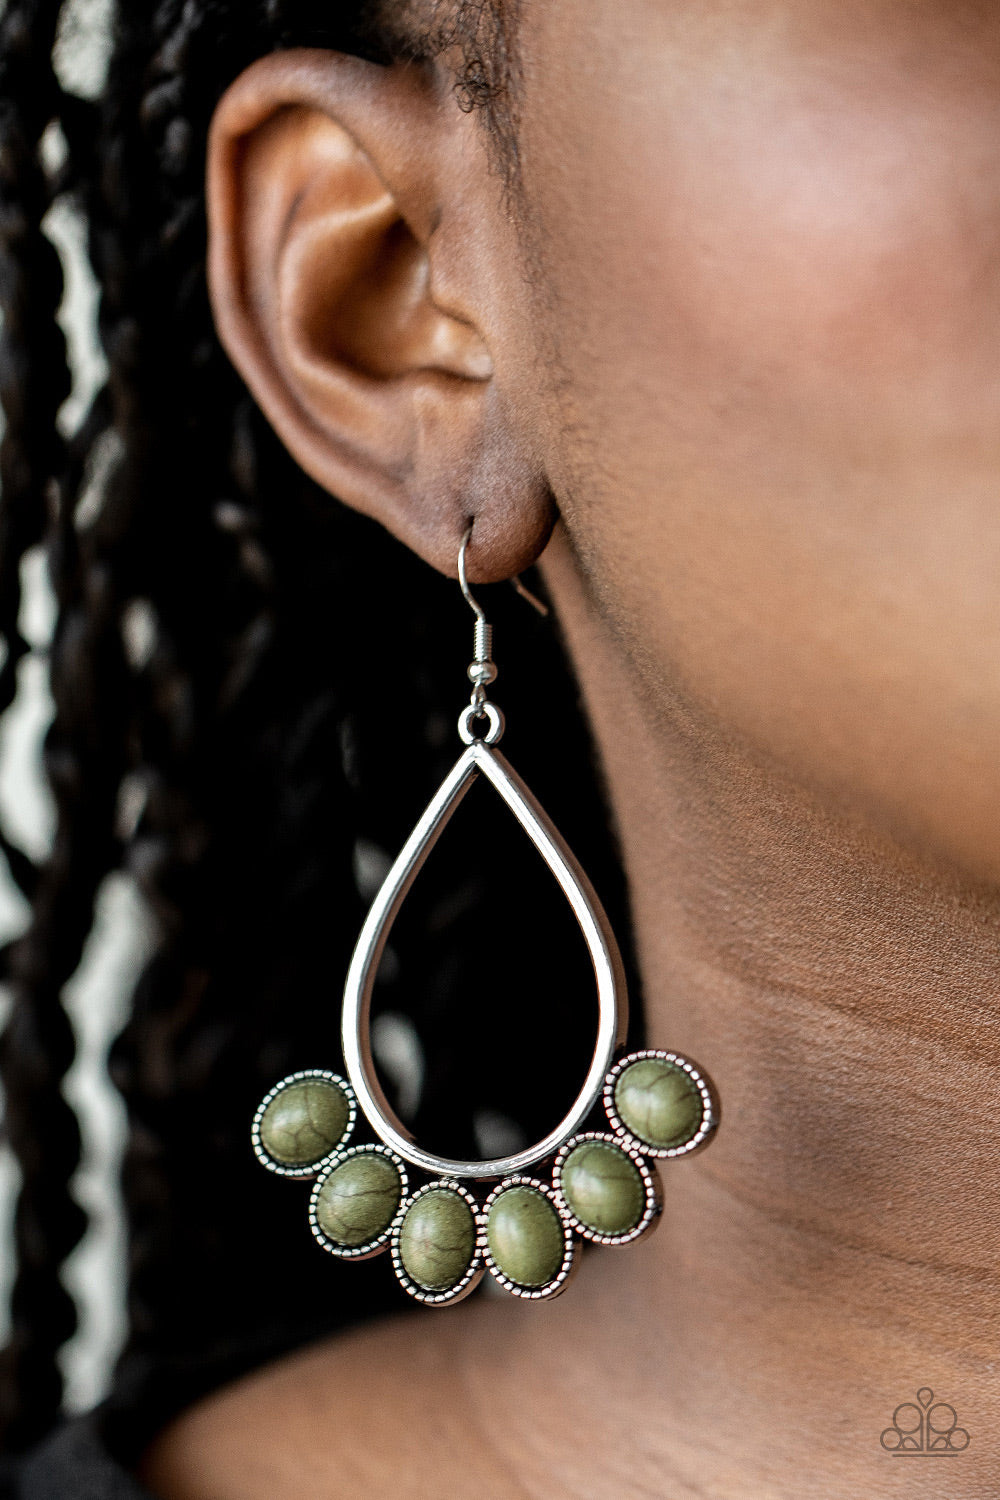 Featuring decorative silver fittings, earthy green stones fan out from the bottom of an airy silver teardrop frame for a seasonal flair. Earring attaches to a standard fishhook fitting. Sold as one pair of earrings.